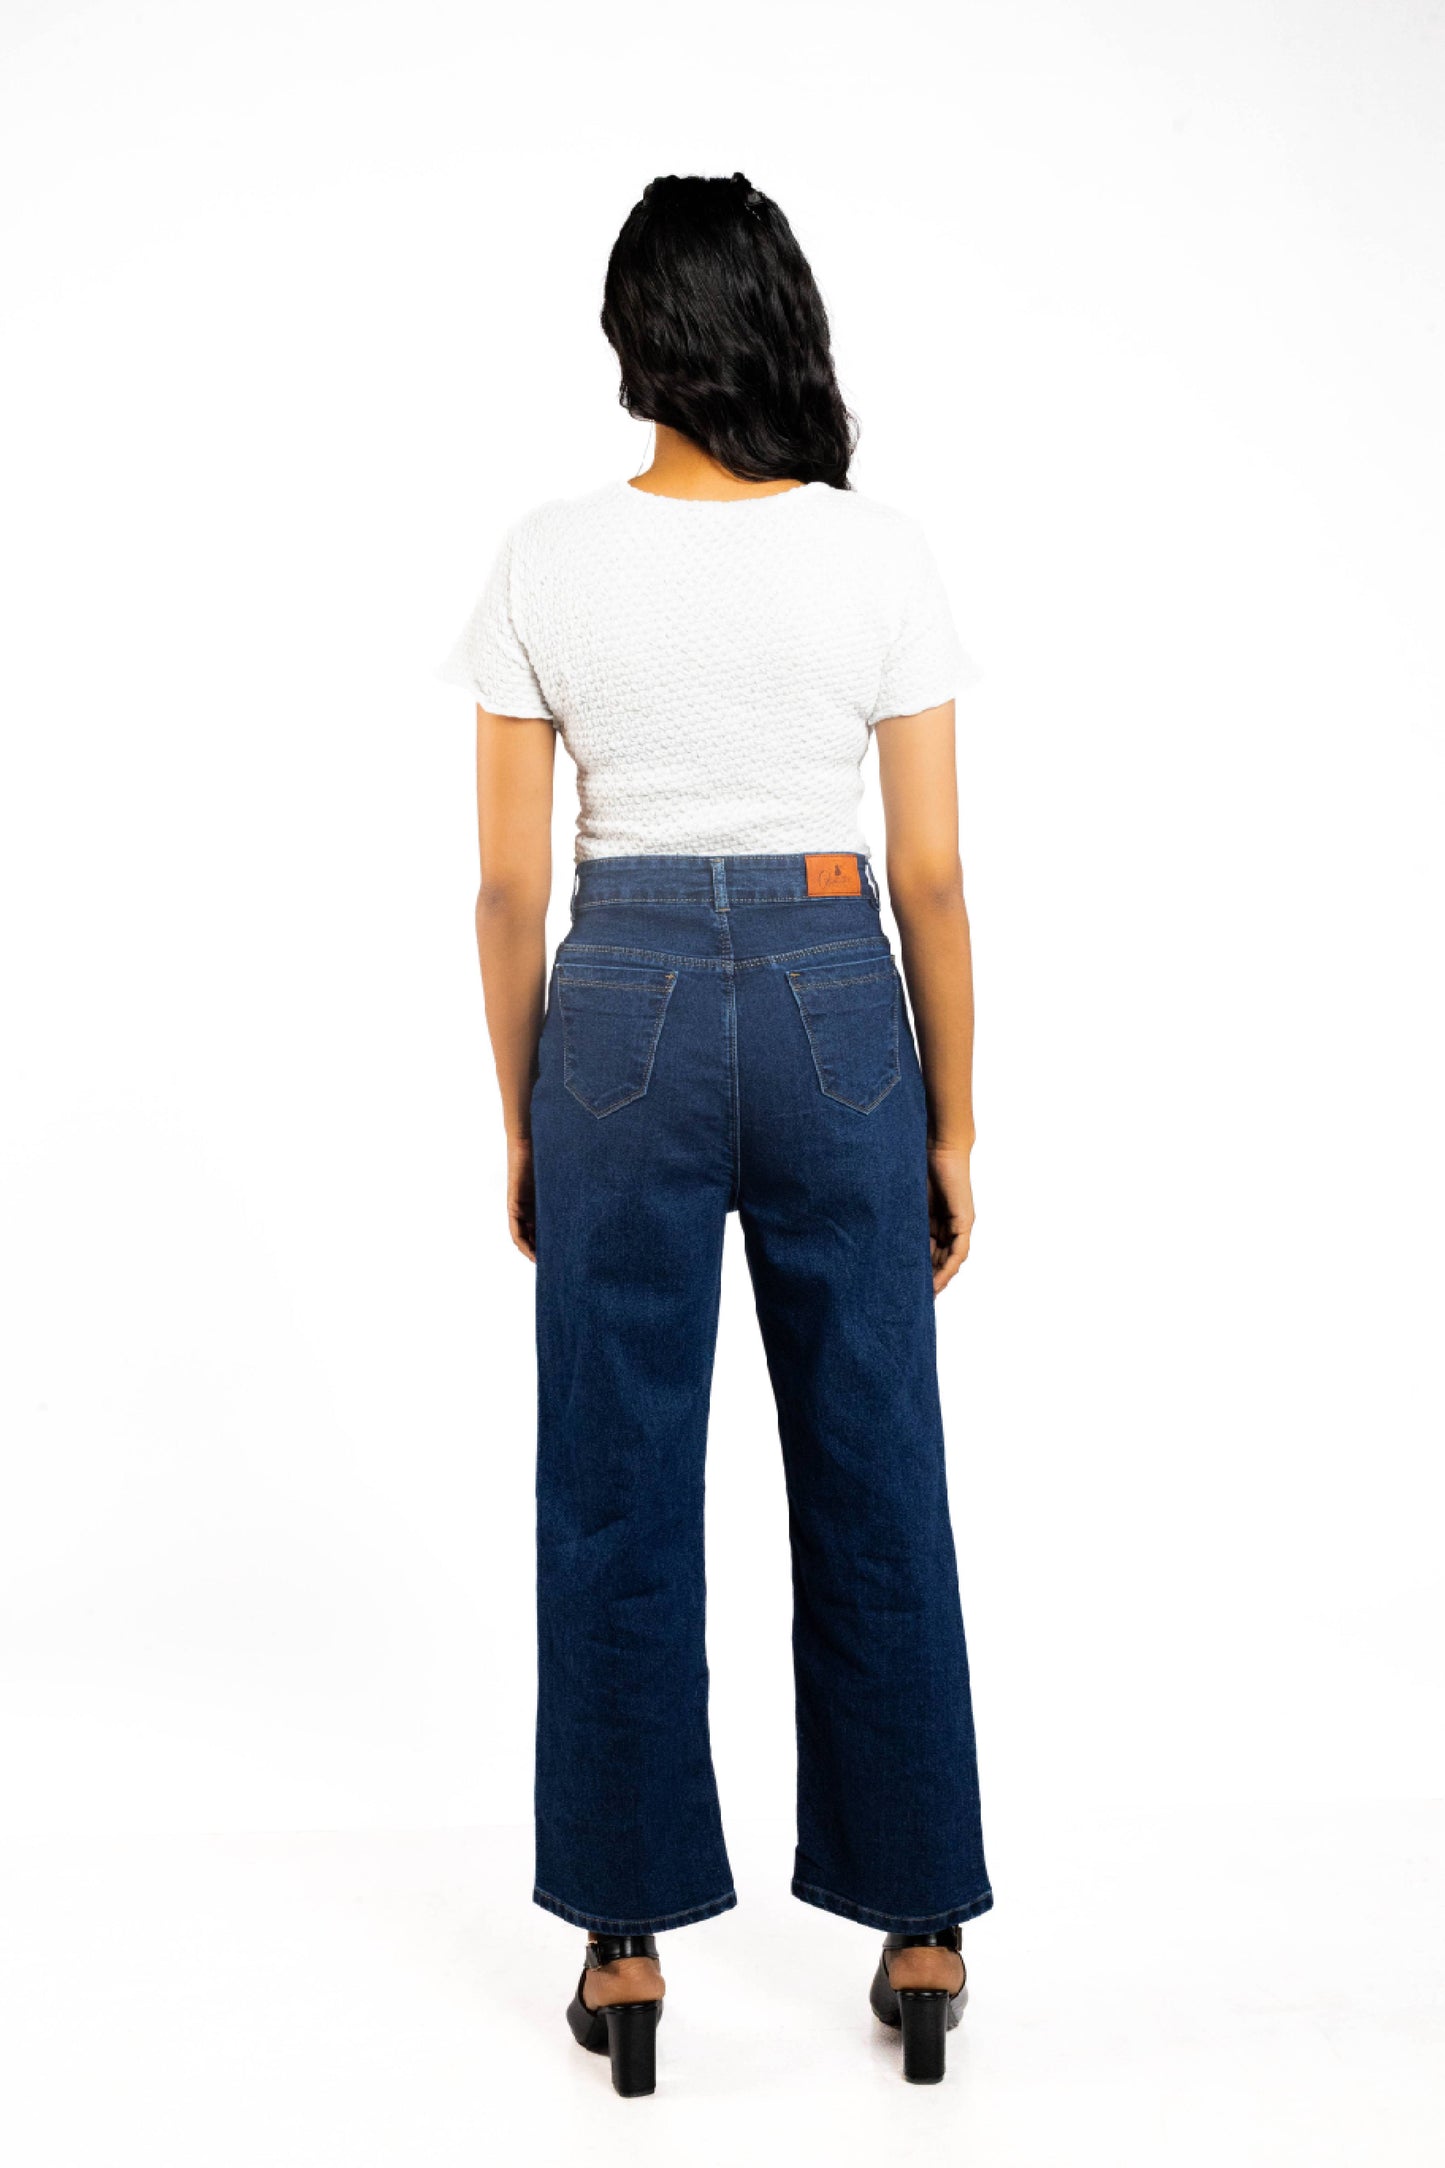 Cotton Denim Staright Fit Jeans For Women